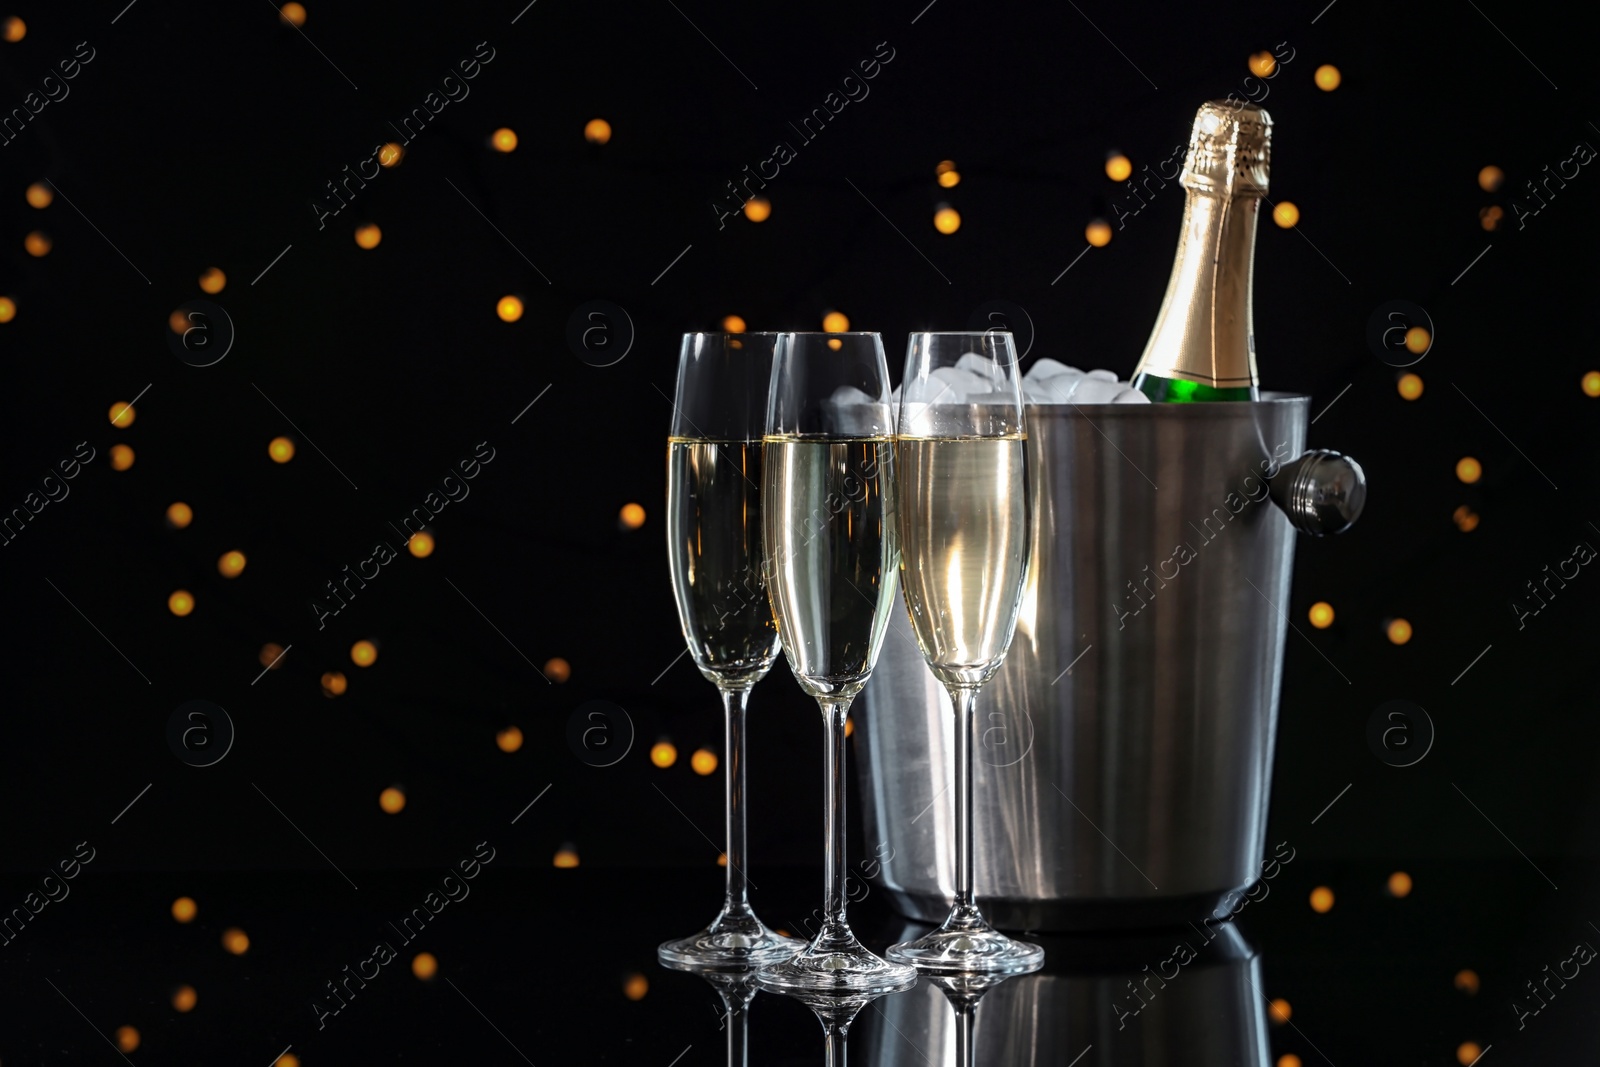 Photo of Glasses with champagne and bottle in bucket on dark table against blurred lights